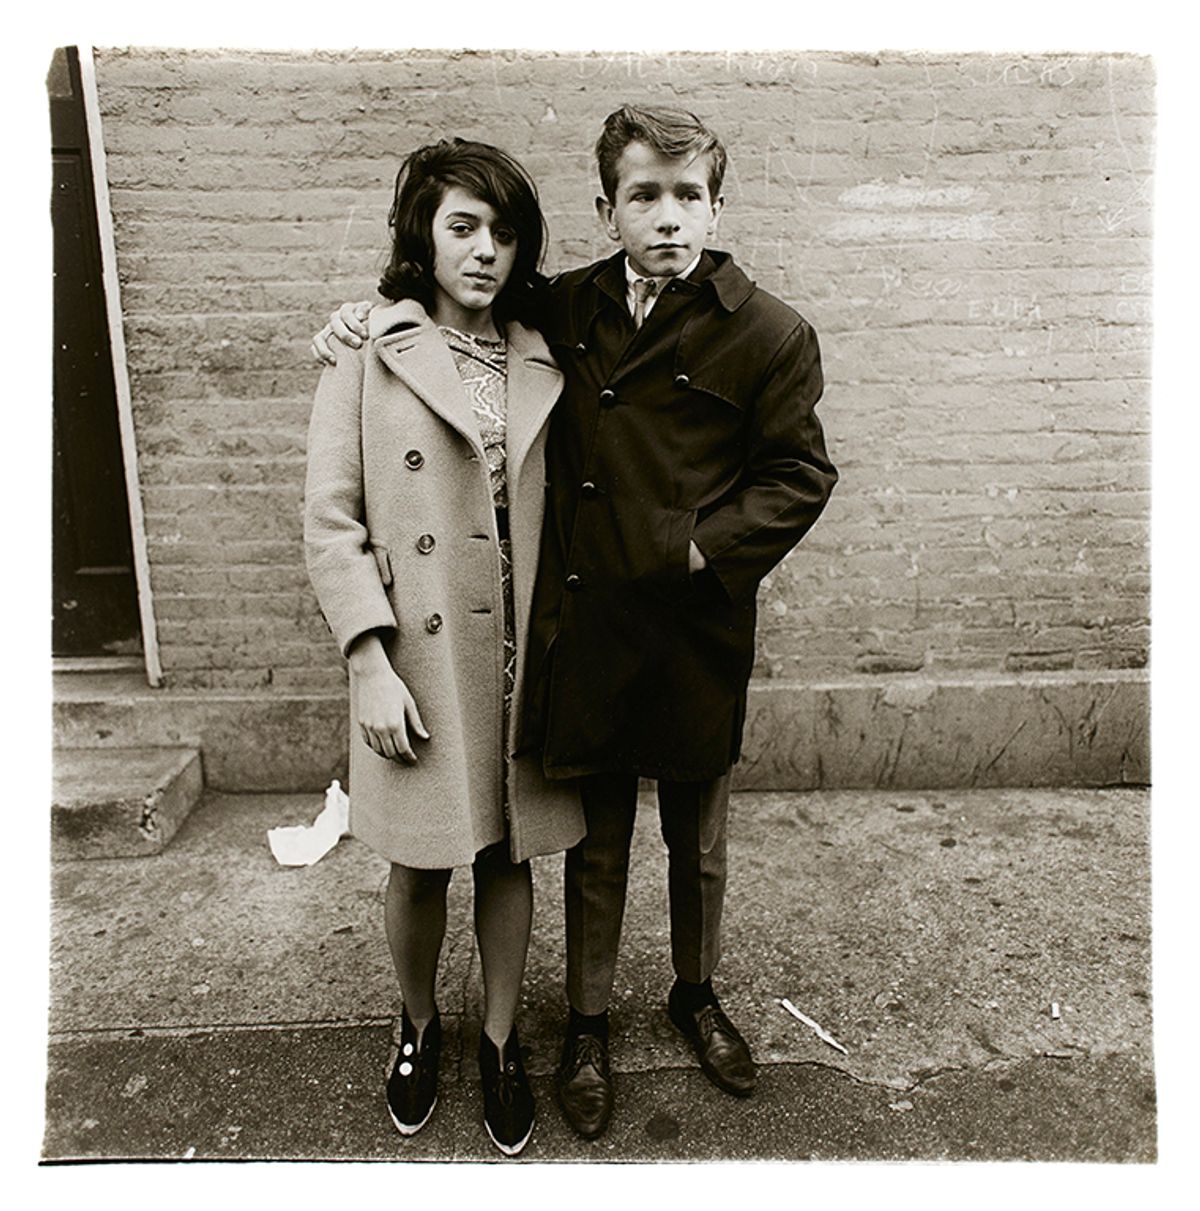 Diane Arbus, Teenage Couple on Hudson Street, NYC, 1963 Gift of Robin and David Young, 2016; © Estate of Diane Arbus